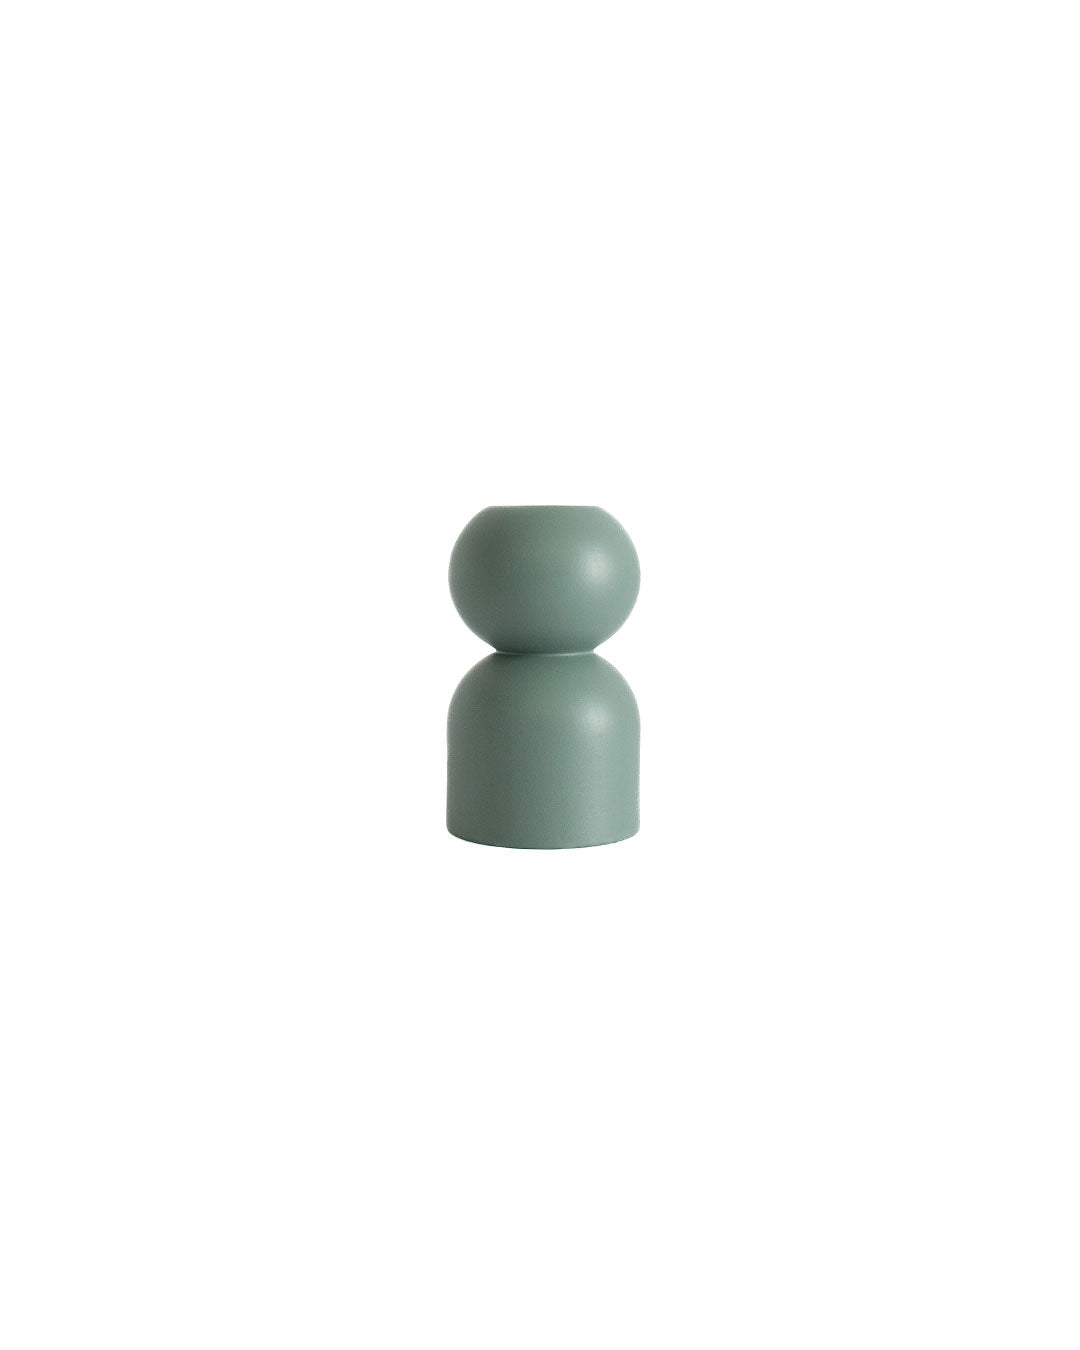 Candleholder-3-in-1-low green